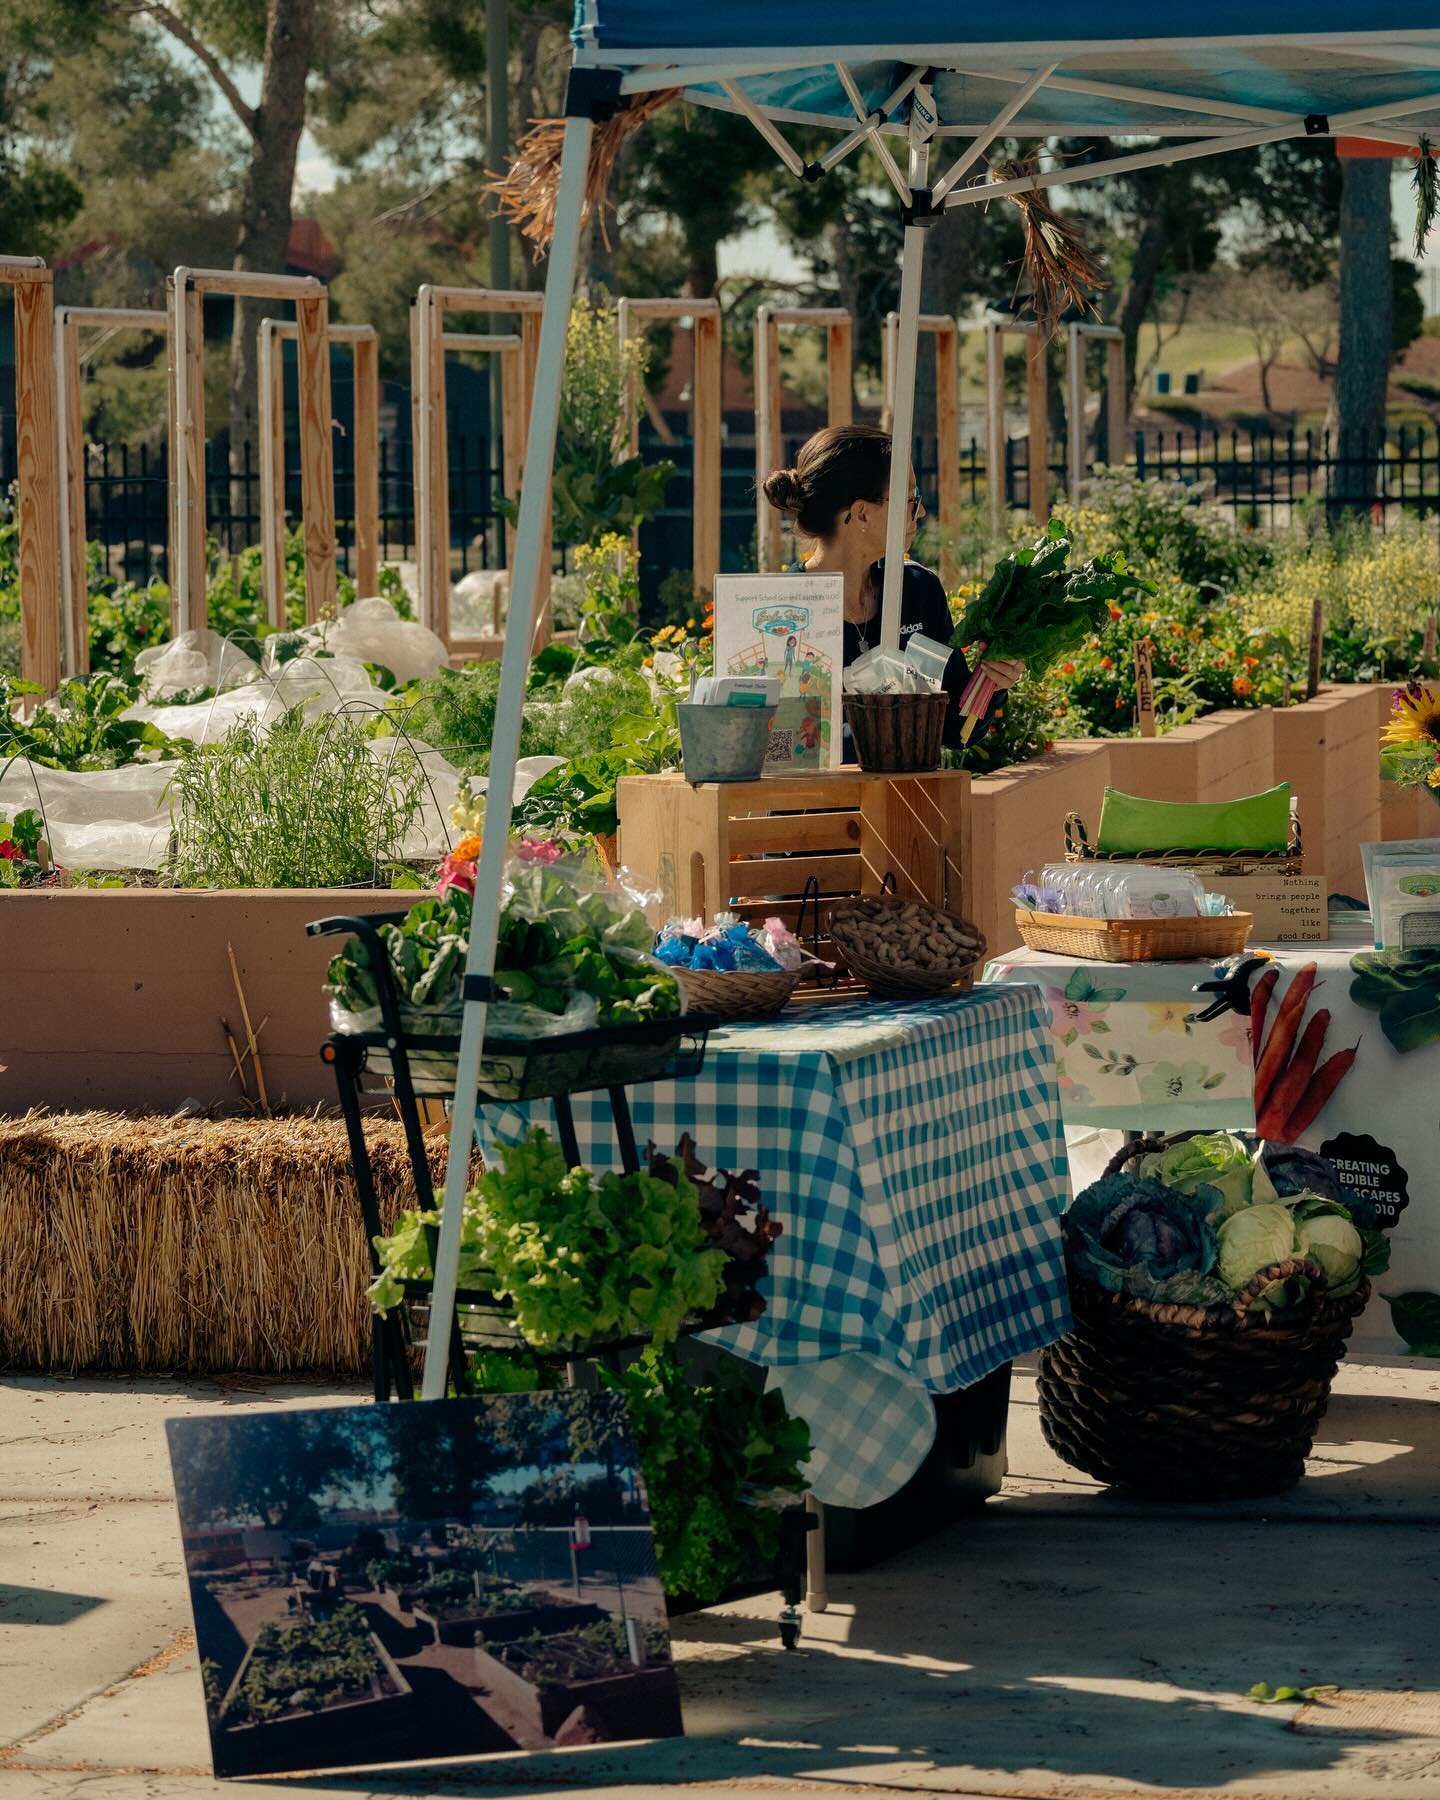 Interested in setting up a booth at our Last Sunday Market?

Visit the link in our bio to fill out the vendor application!

Located at Garden Farms&rsquo; community Garden inside of Craig Ranch Regional Park!